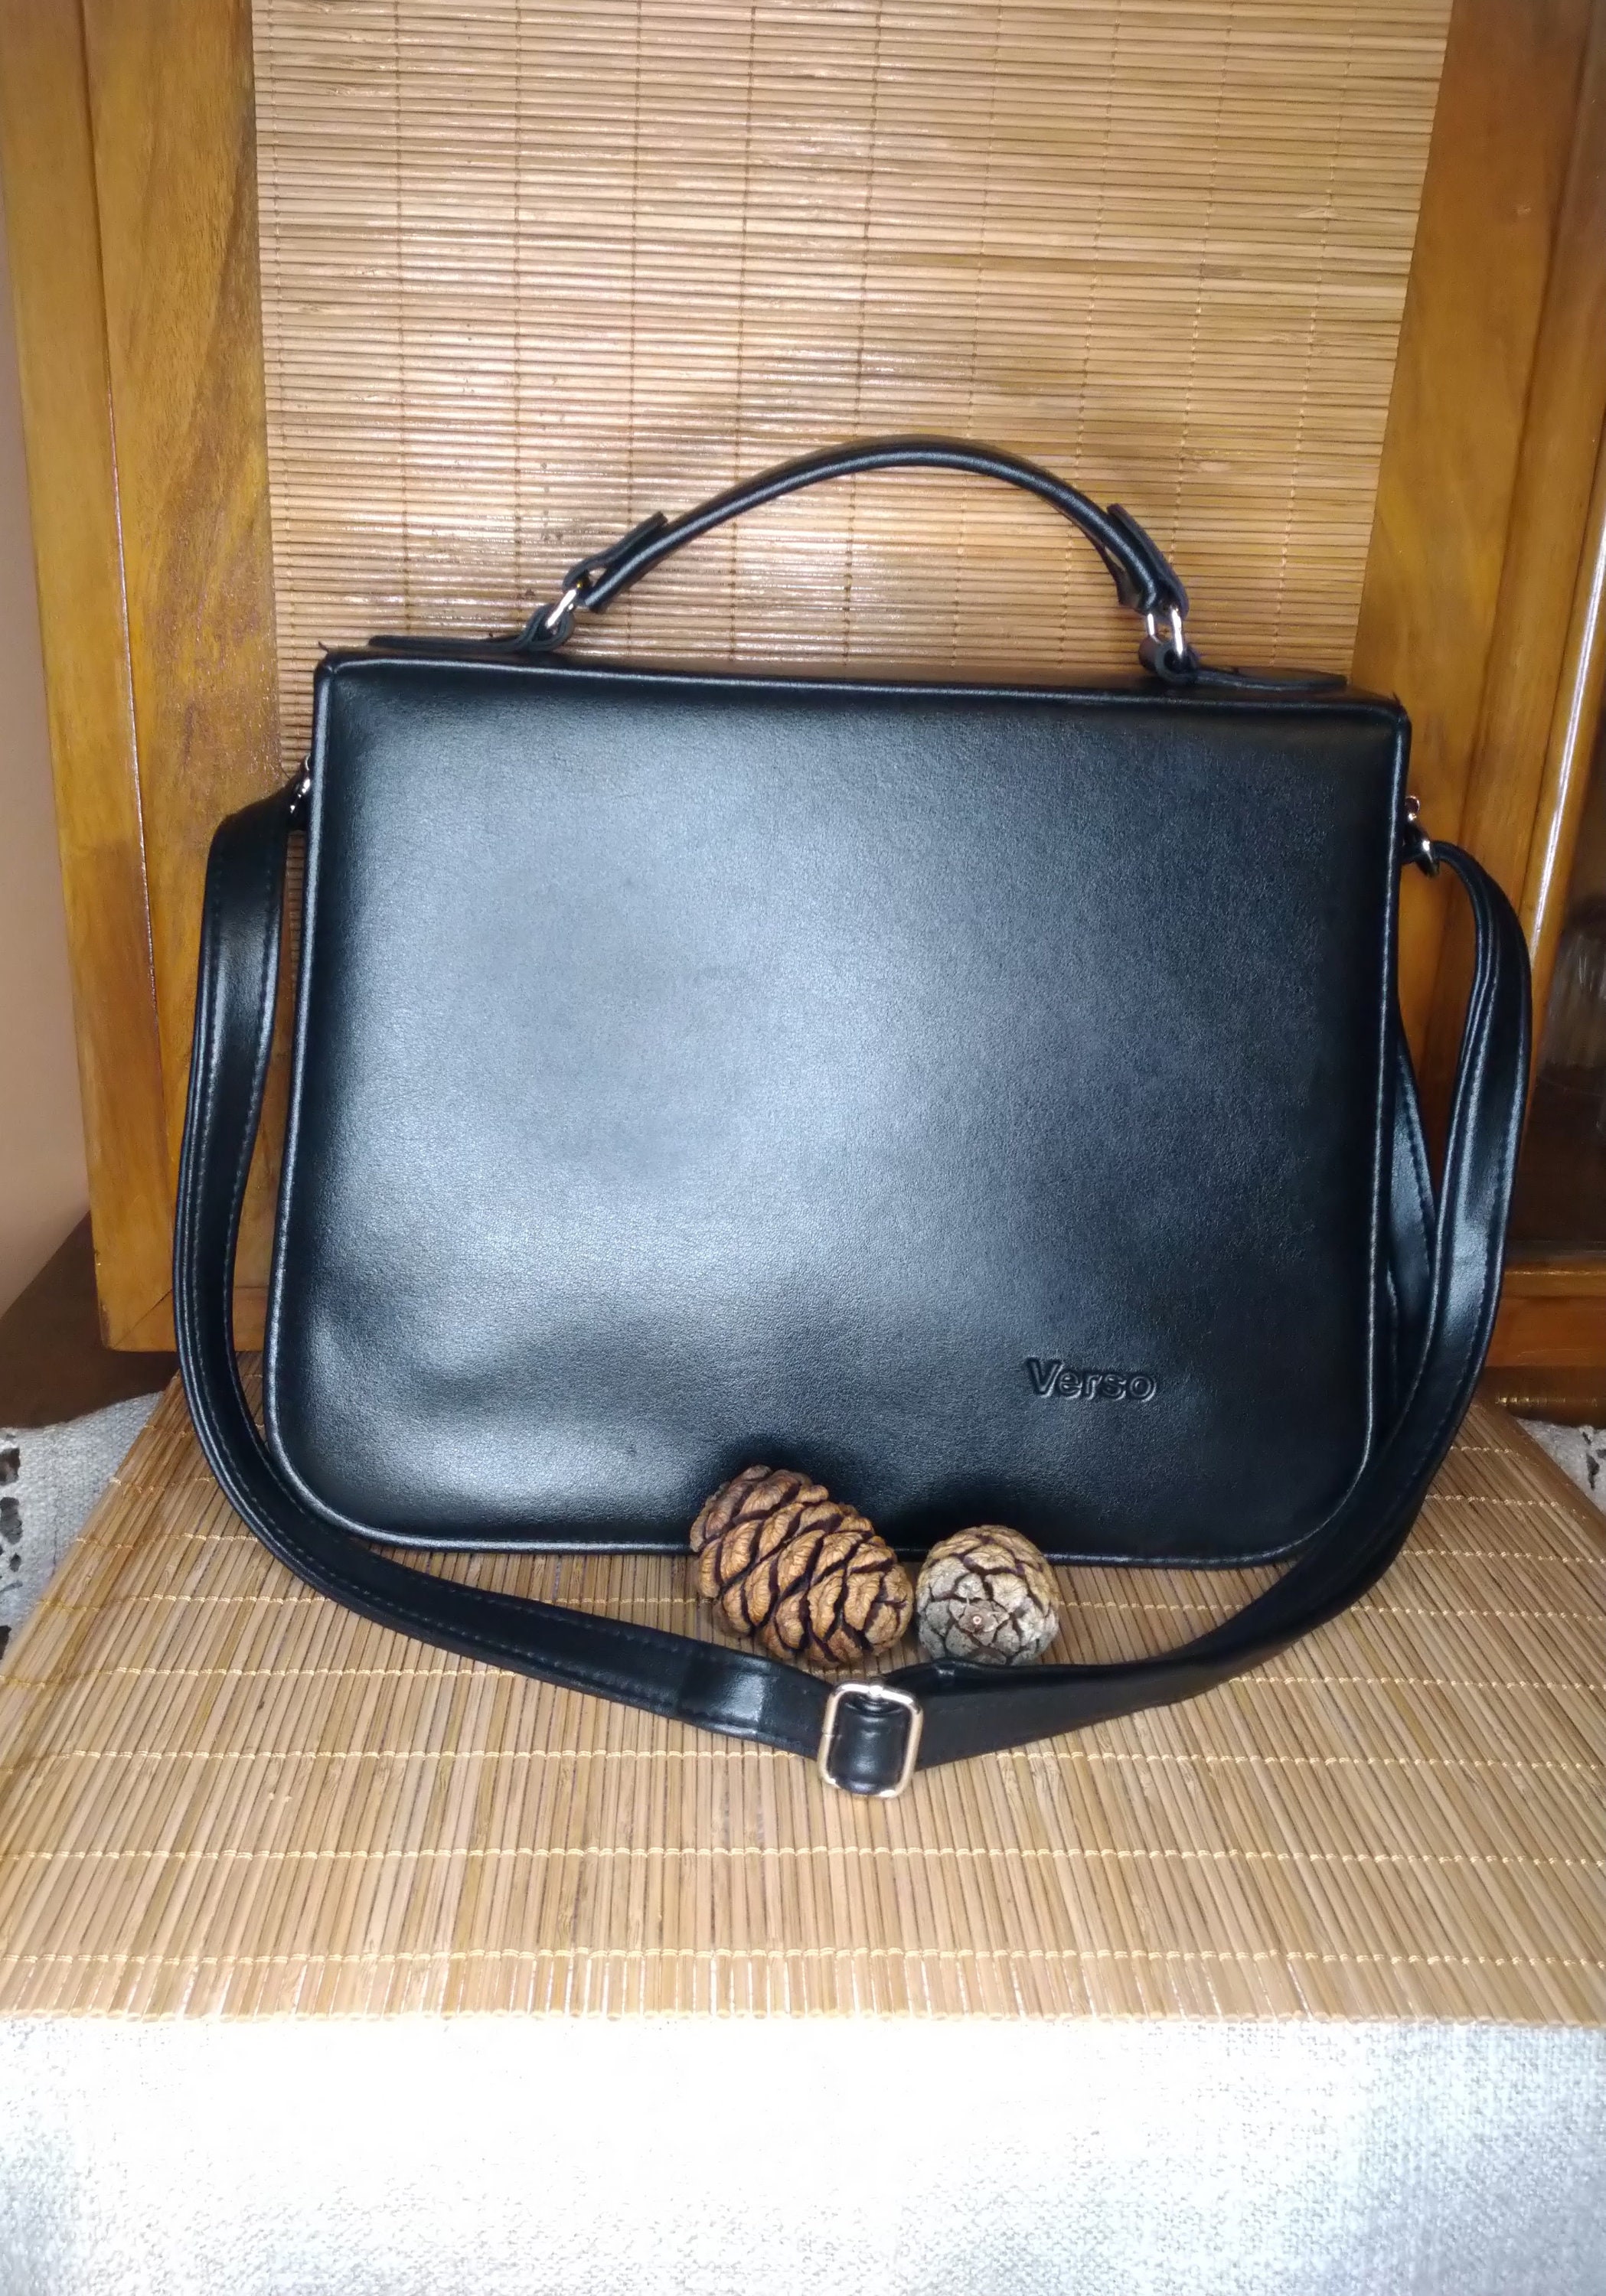 Black Crossbody Leather Bag With Thick Strap, Leather Handbag